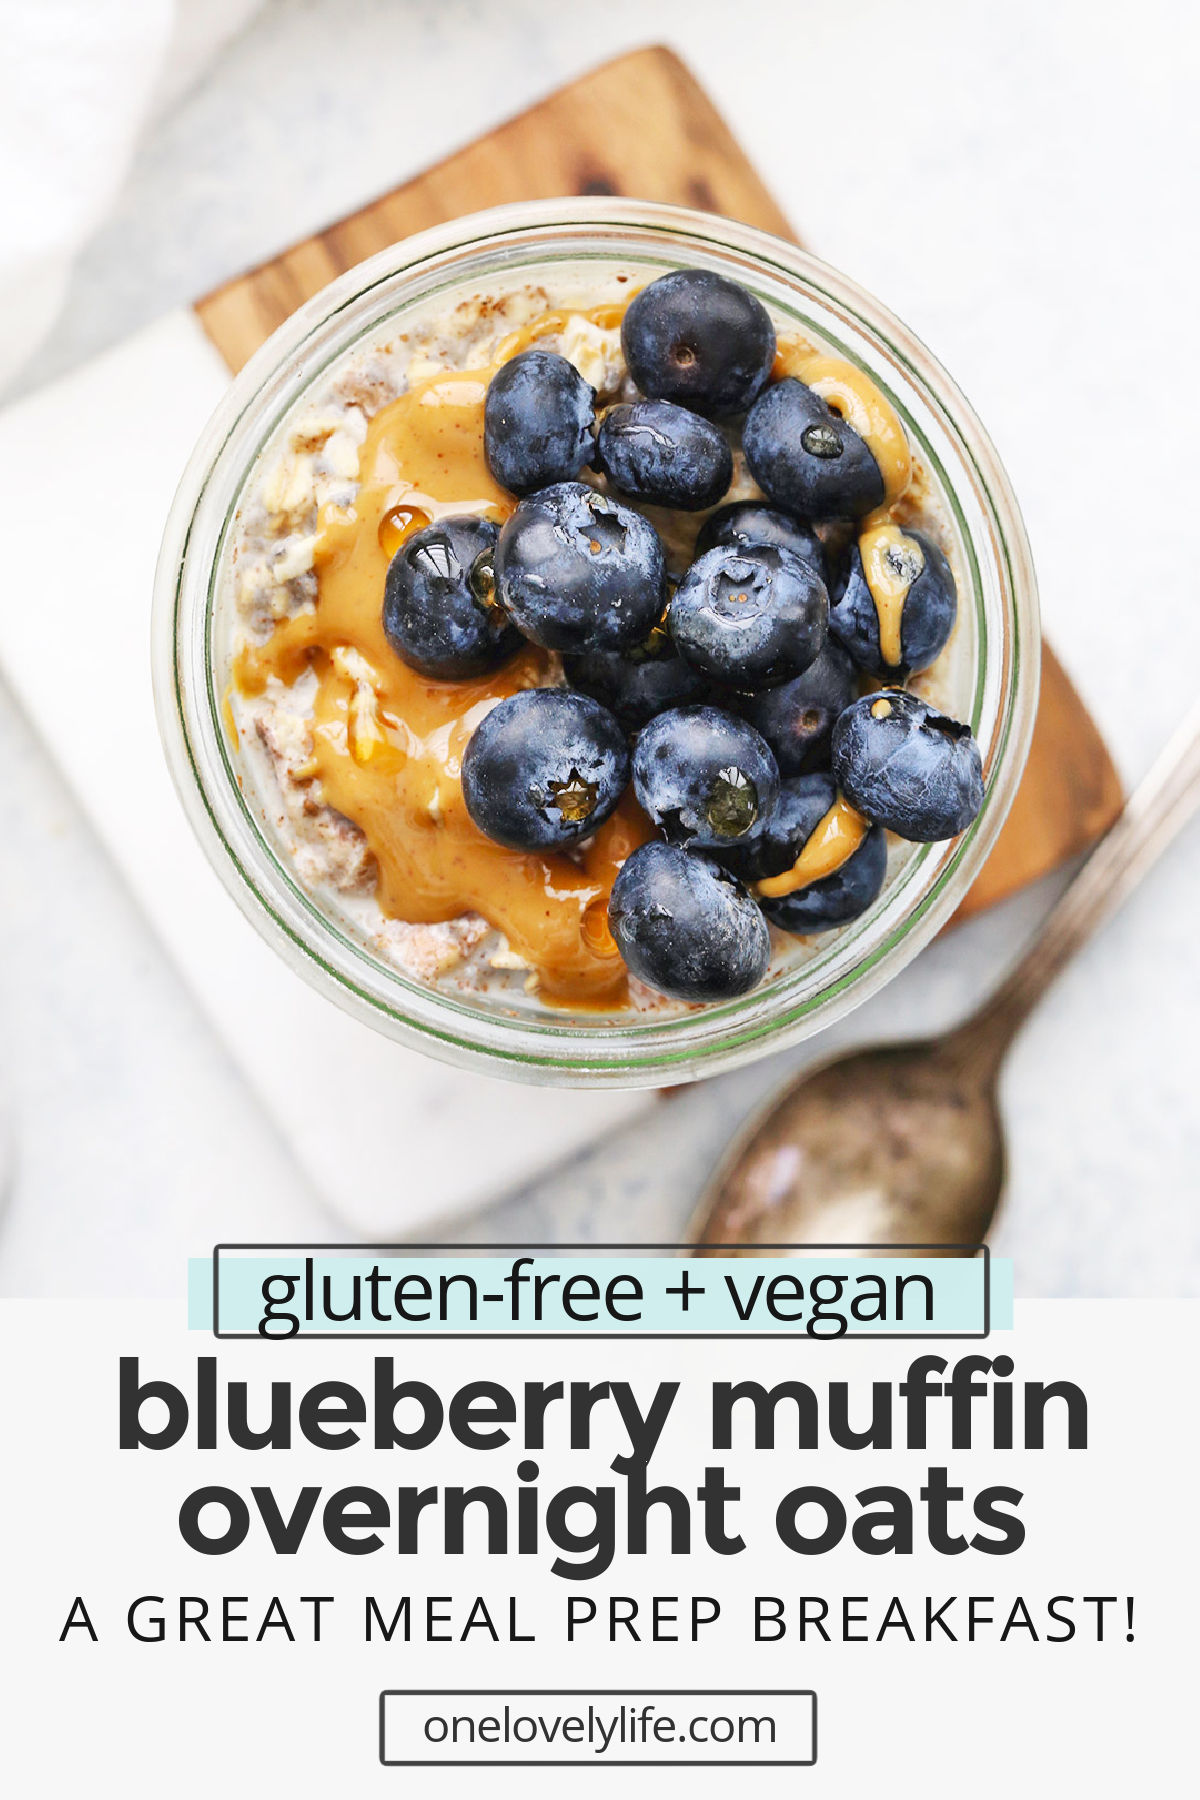 Blueberry Muffin Overnight Oats - Creamy, delicious overnight oats with a blueberry muffin twist!  You'll love this yummy meal prep breakfast! (Gluten-free, vegan) // Meal Prep Breakfast // Blueberry Overnight Oats recipe // Healthy Breakfast // blueberry overnight oatmeal // blueberry muffin overnight oatmeal recipe